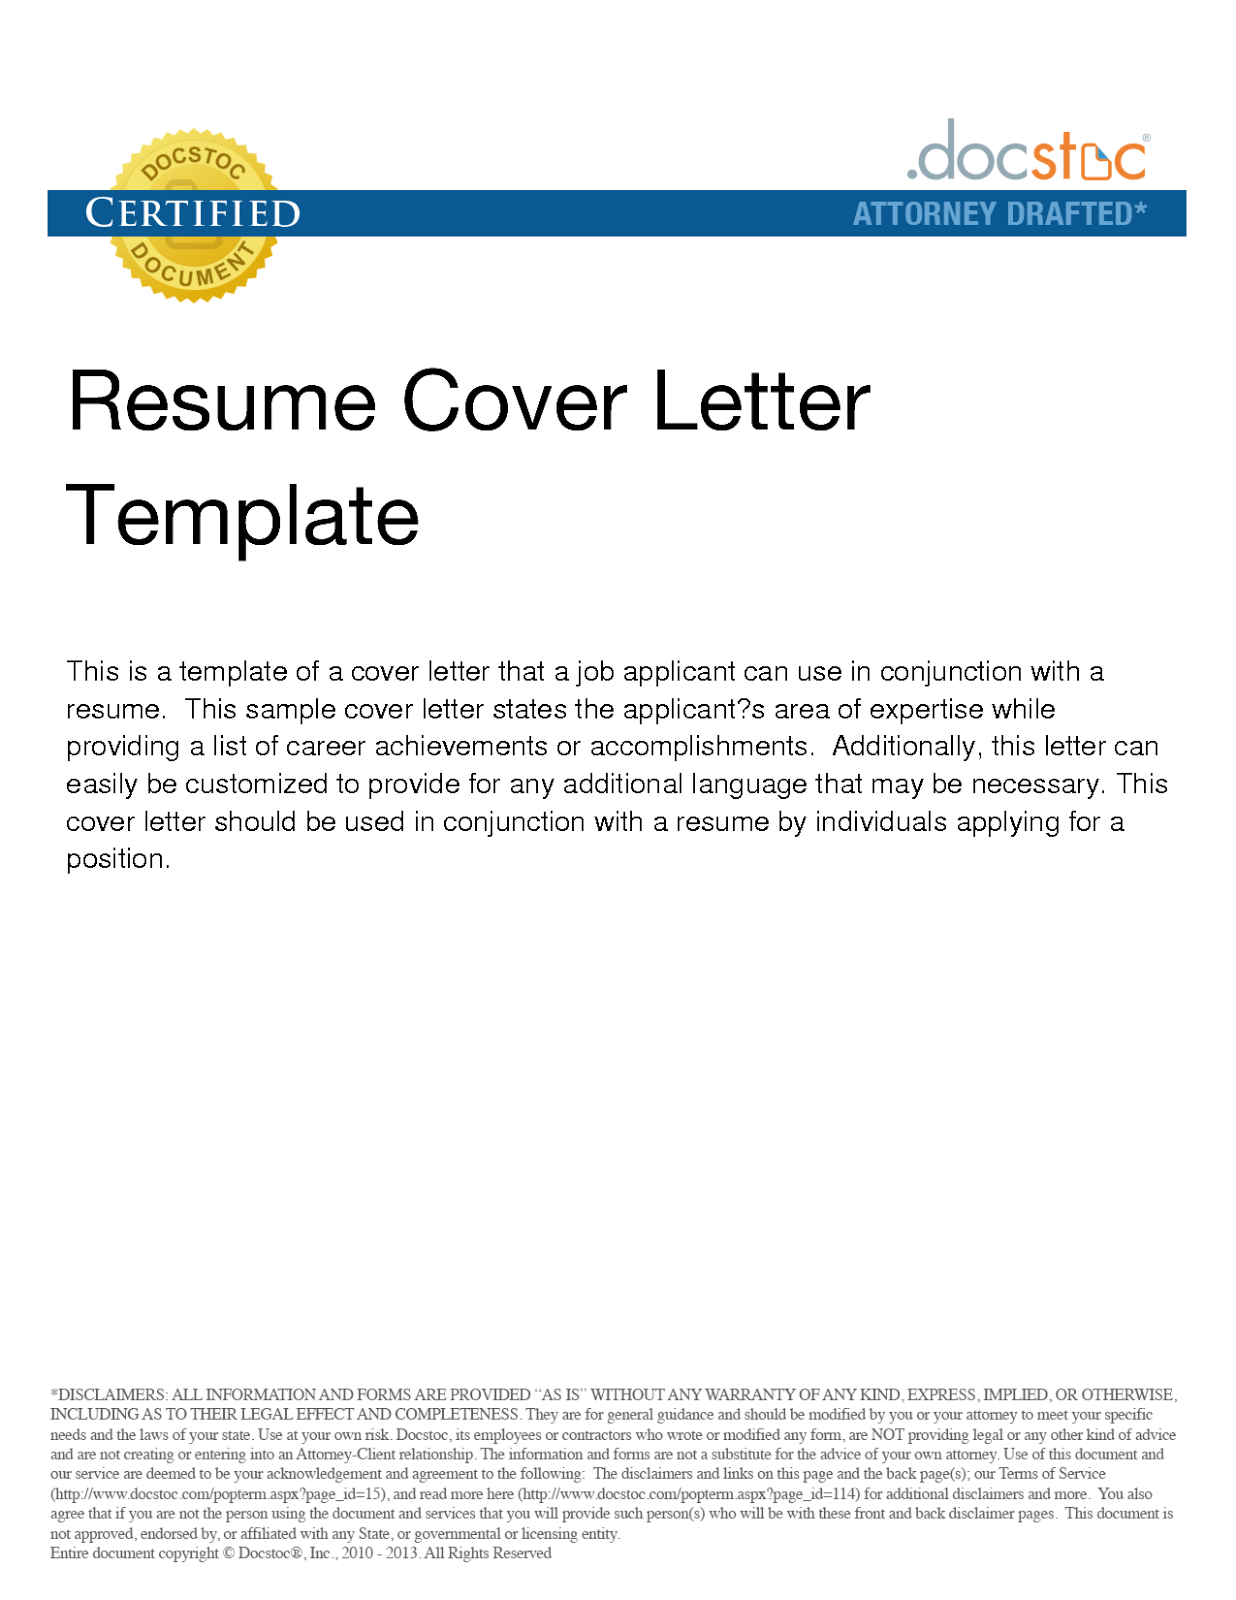 Sample email sending resume and cover letter